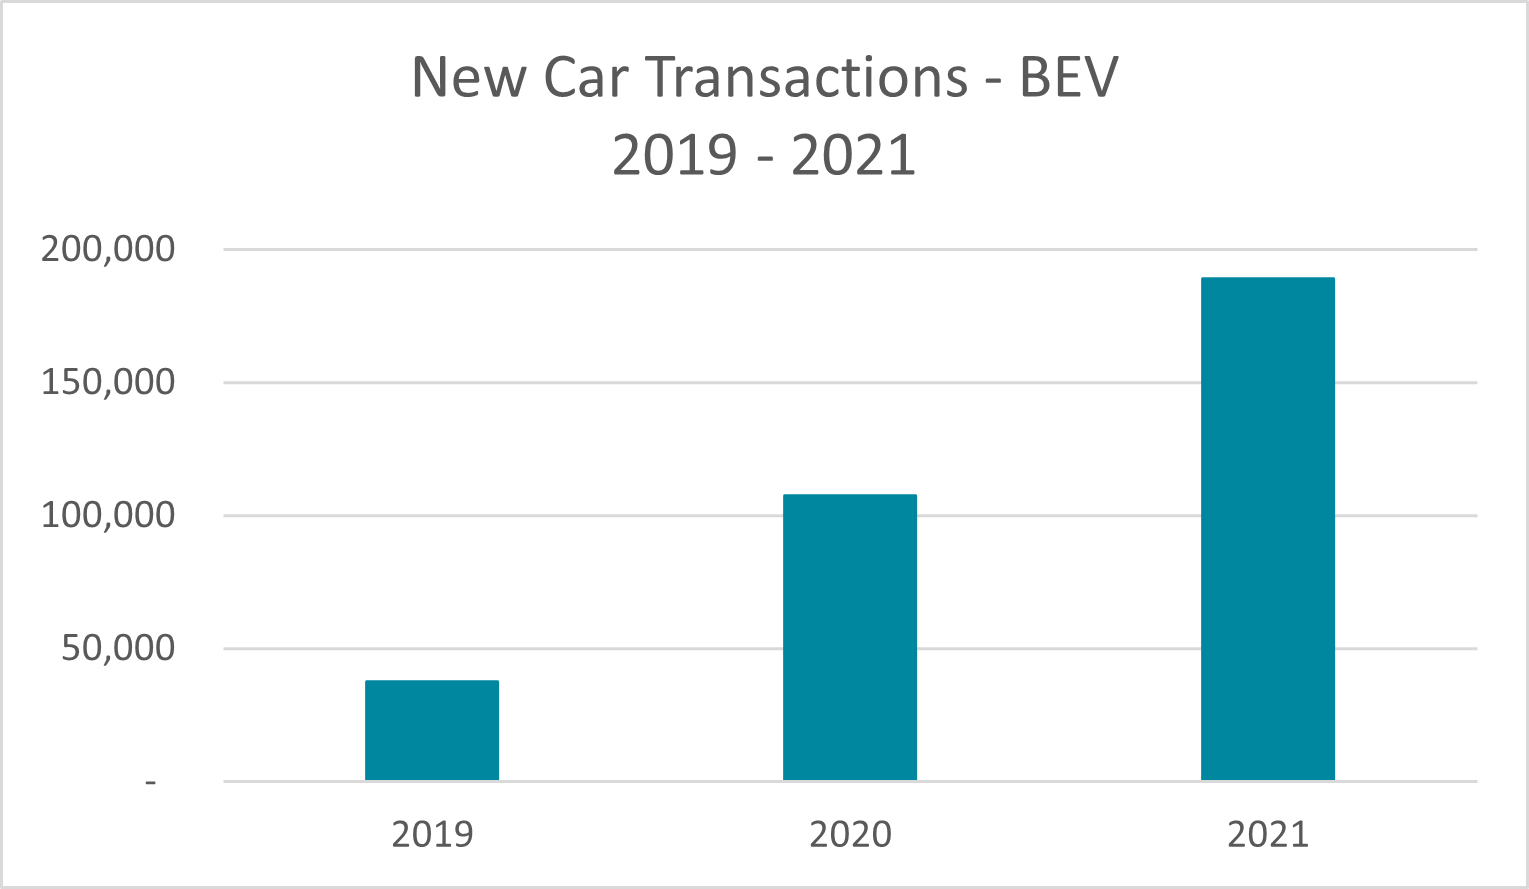 The total change in new Battery Vehicle Registrations between 2019 and 2021